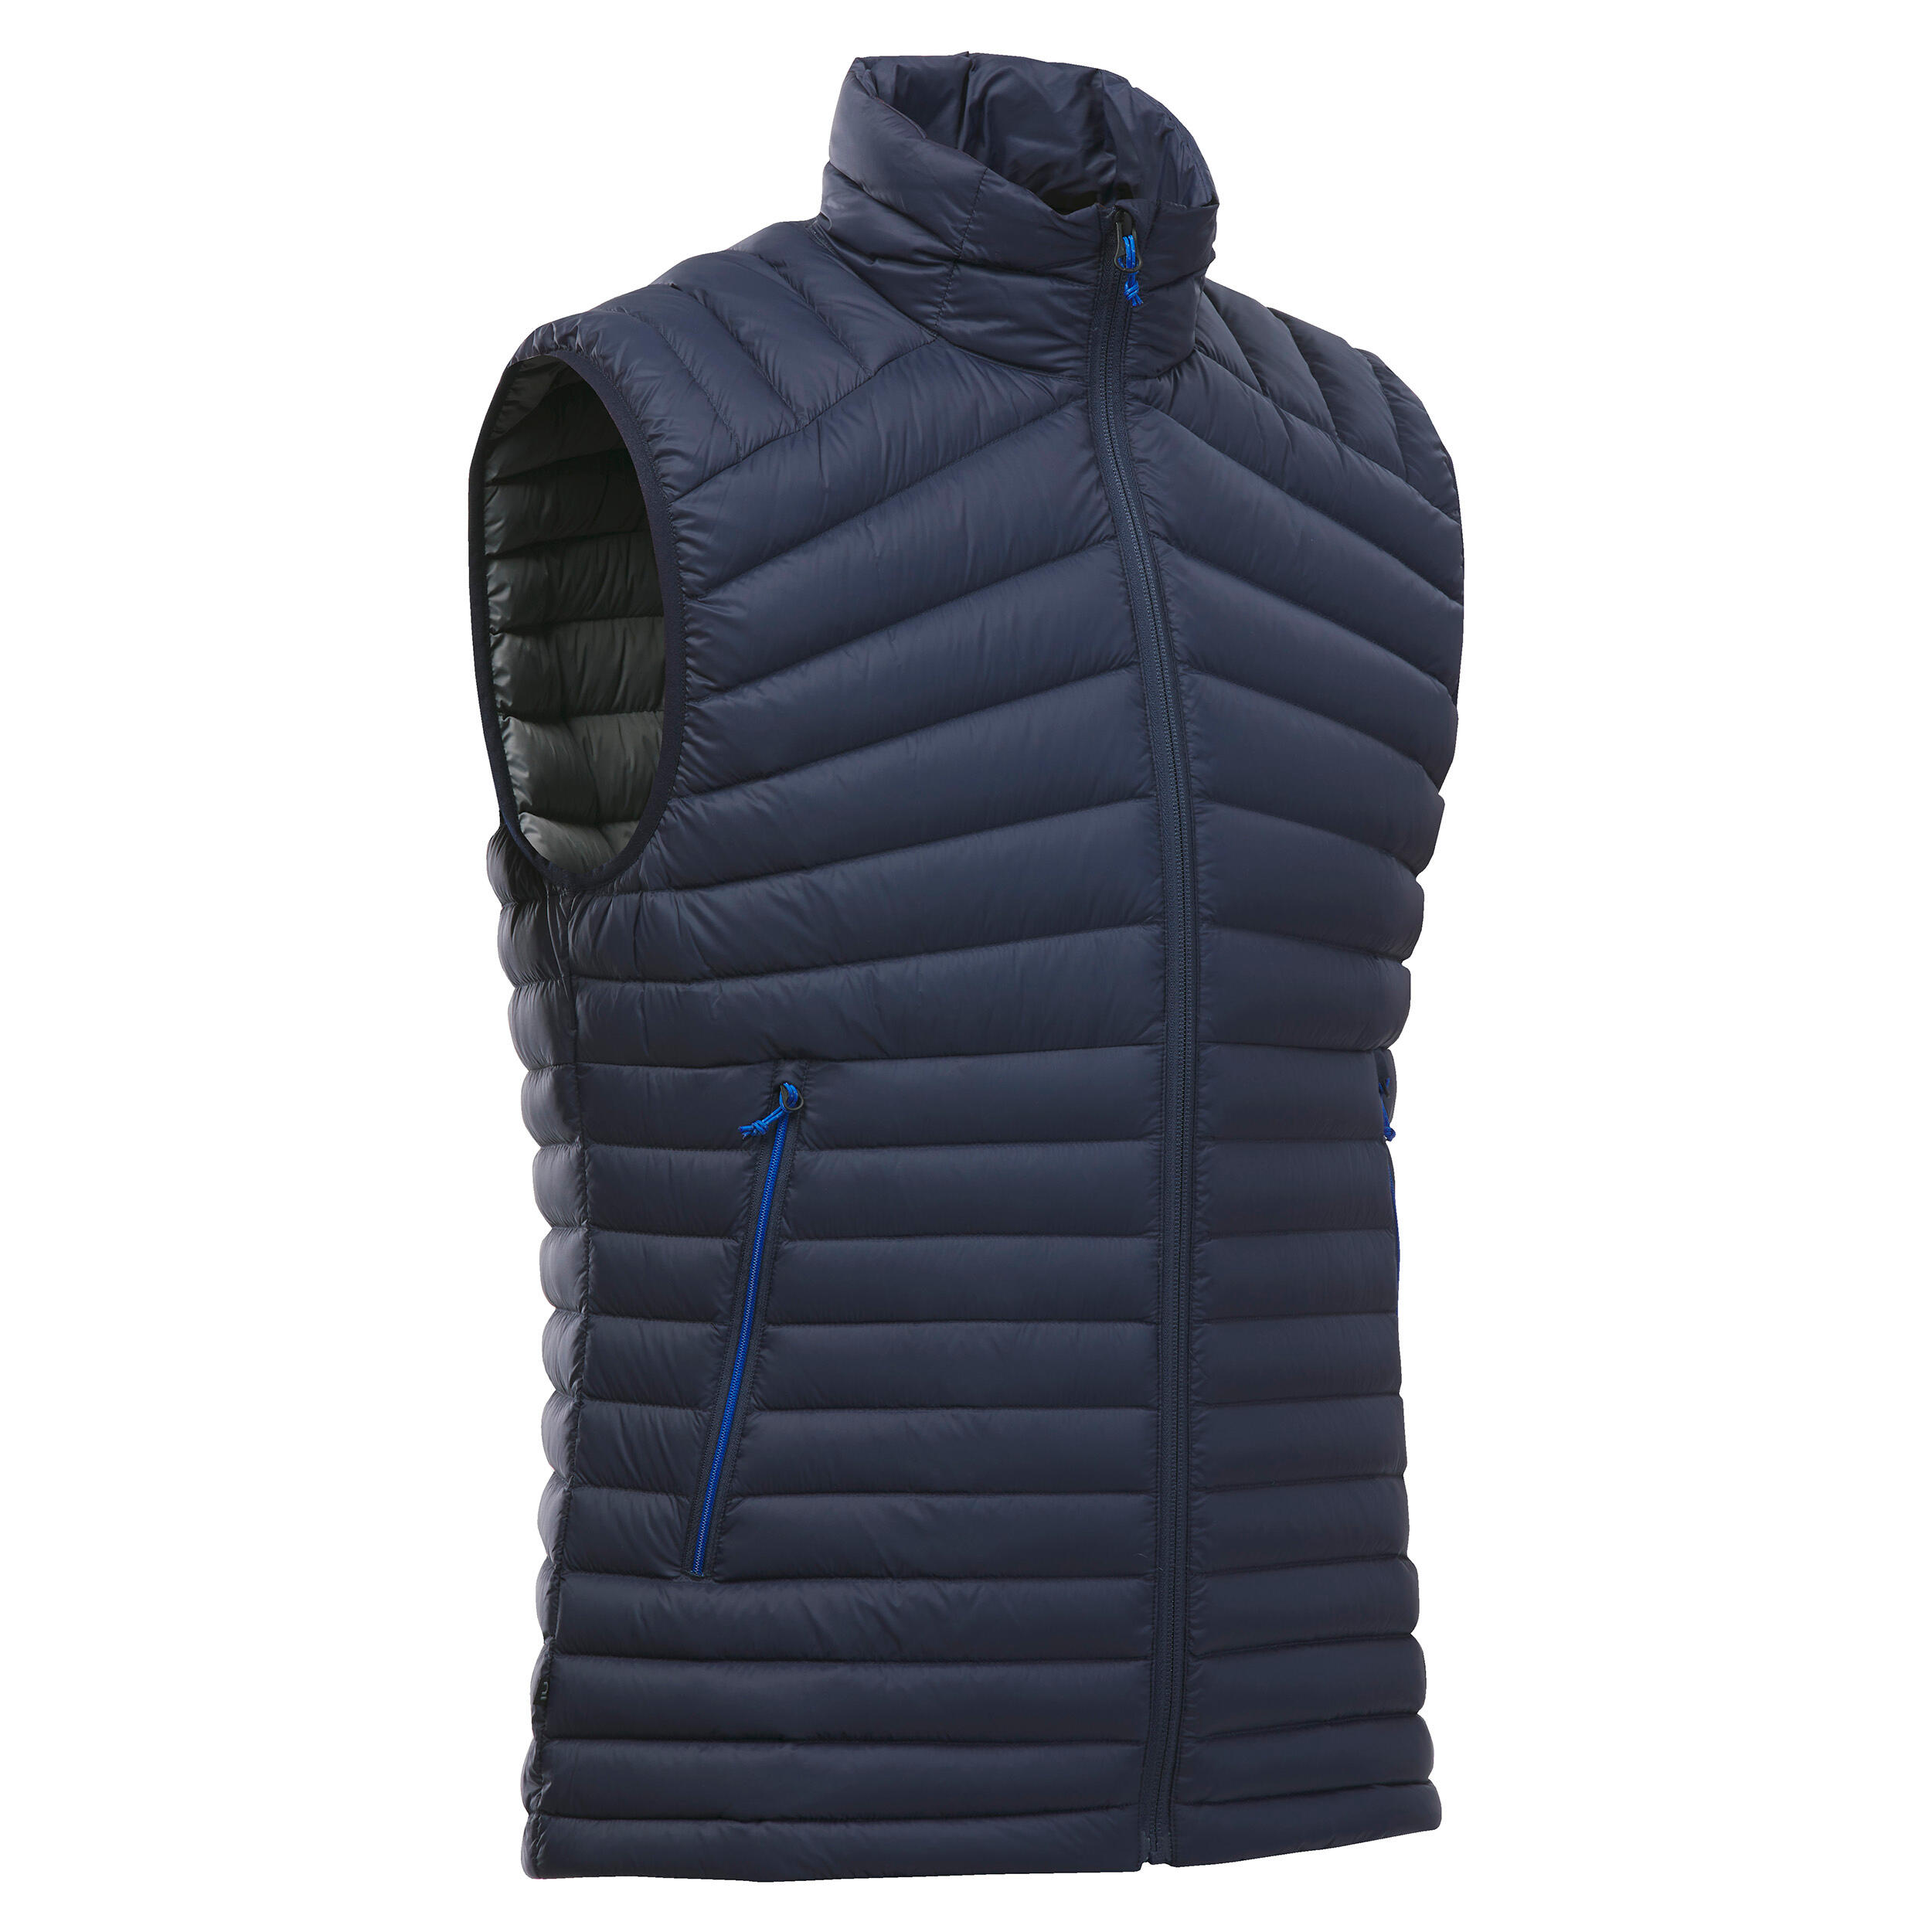 Mens Padded Coat Lined Quilted Sleeveless Bodywarmers Hooded Gilets Vest Jackets 